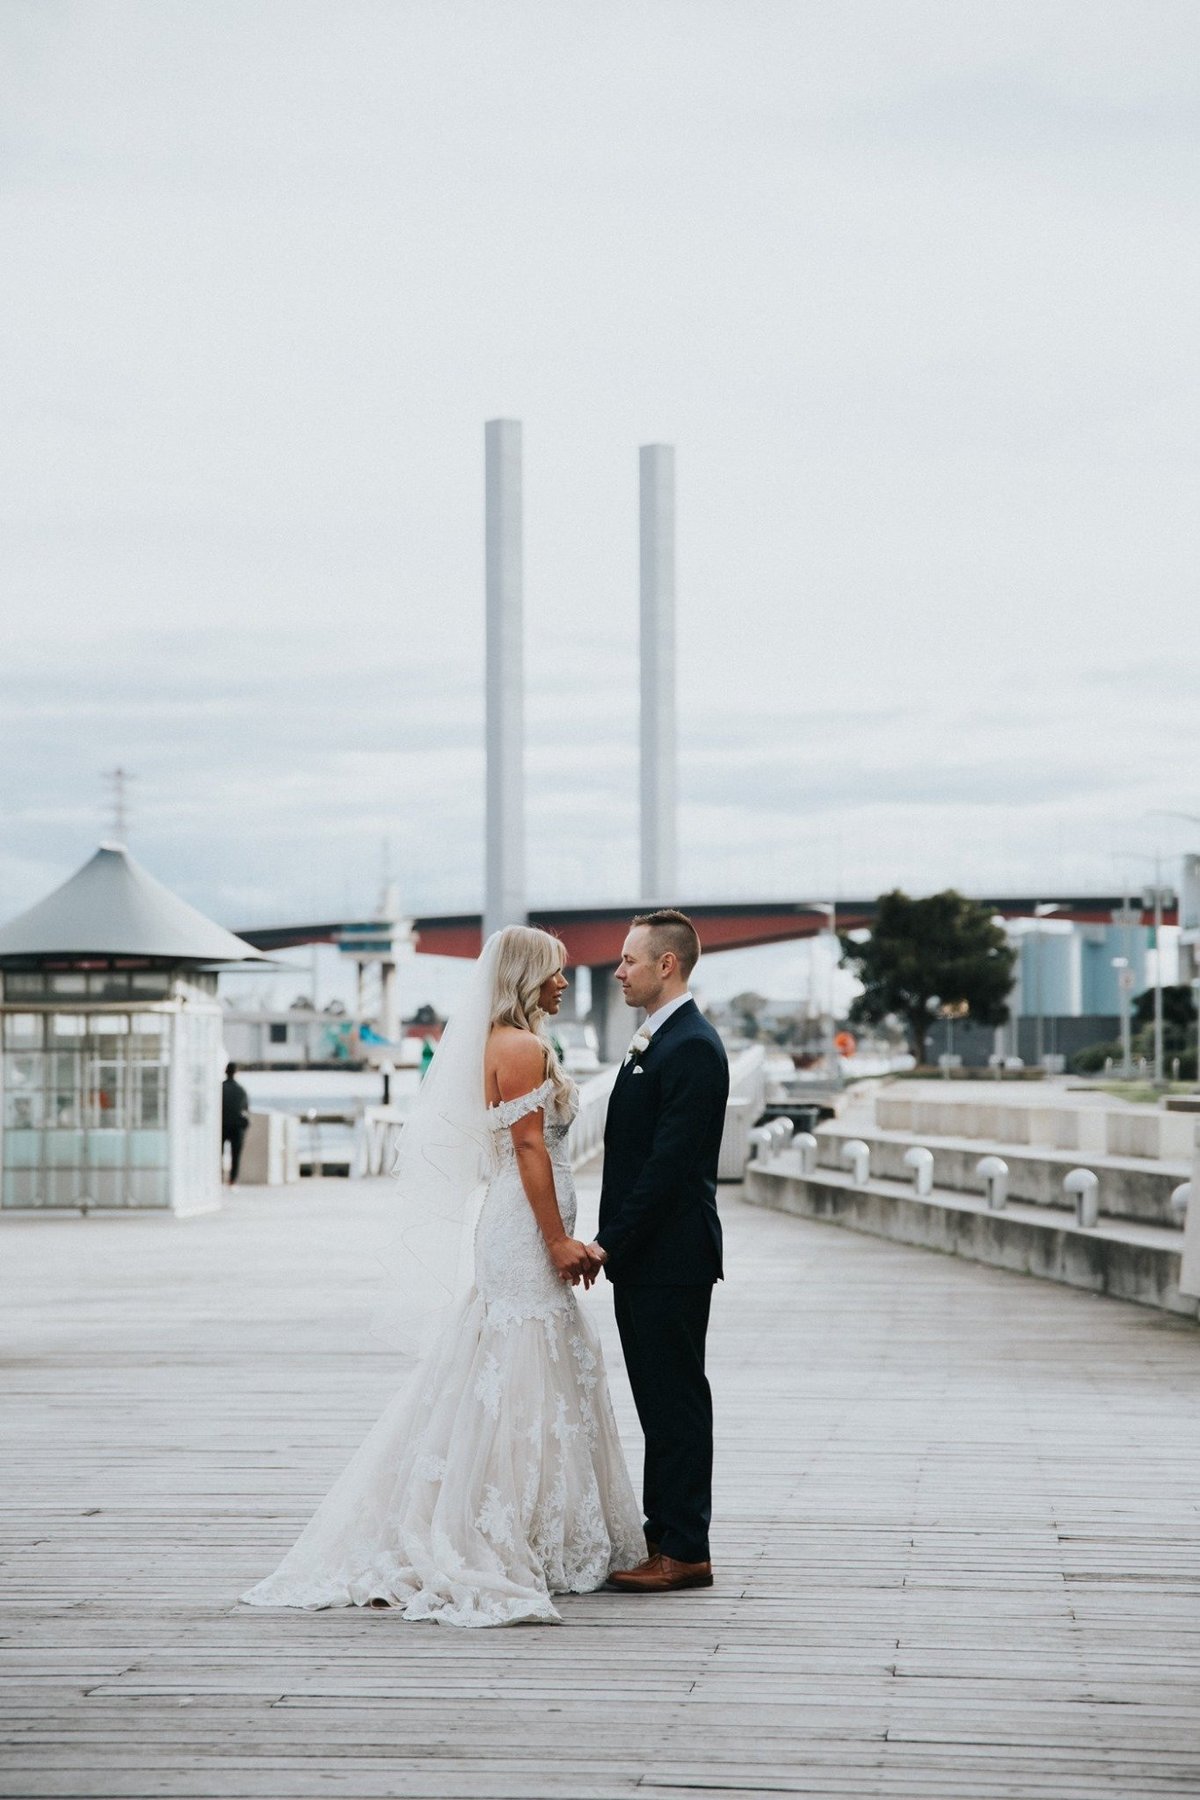 Bridal Portraits at Docklands Melbourne. All Smiles Wedding Photographer. Sapphire and Stone Photography